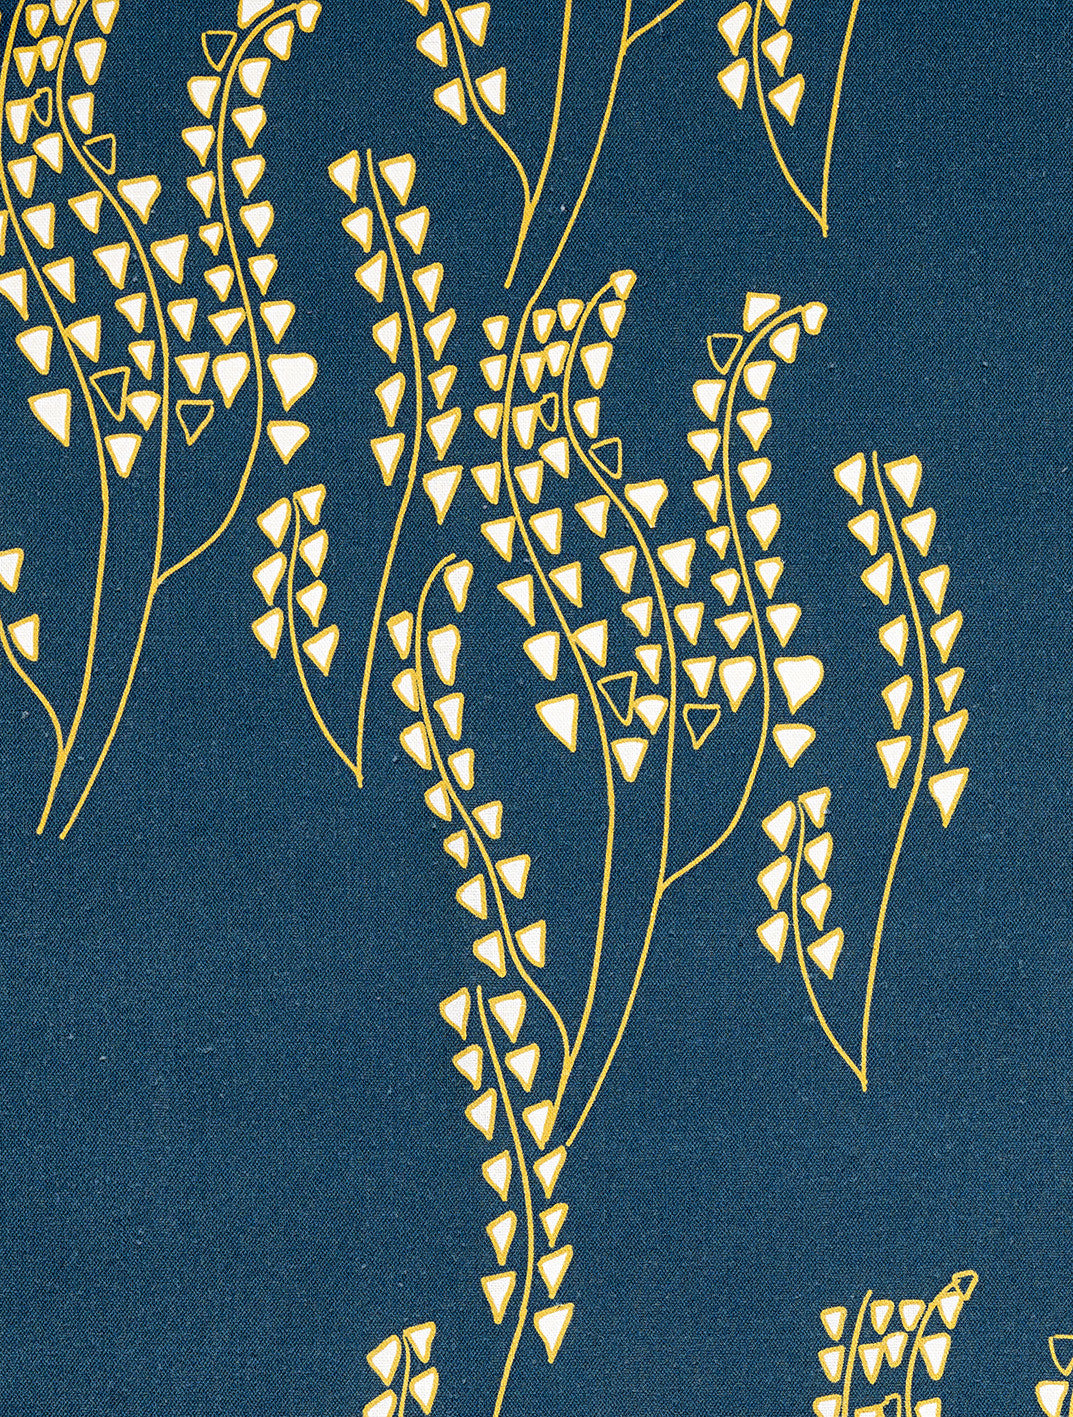 Yuma graphic Wild grass pattern cotton linen Home decor interior Fabric by the yard or meter for curtains, blinds or upholstery - Petrol navy dark blue - maize yellow ships from Canada (USA)